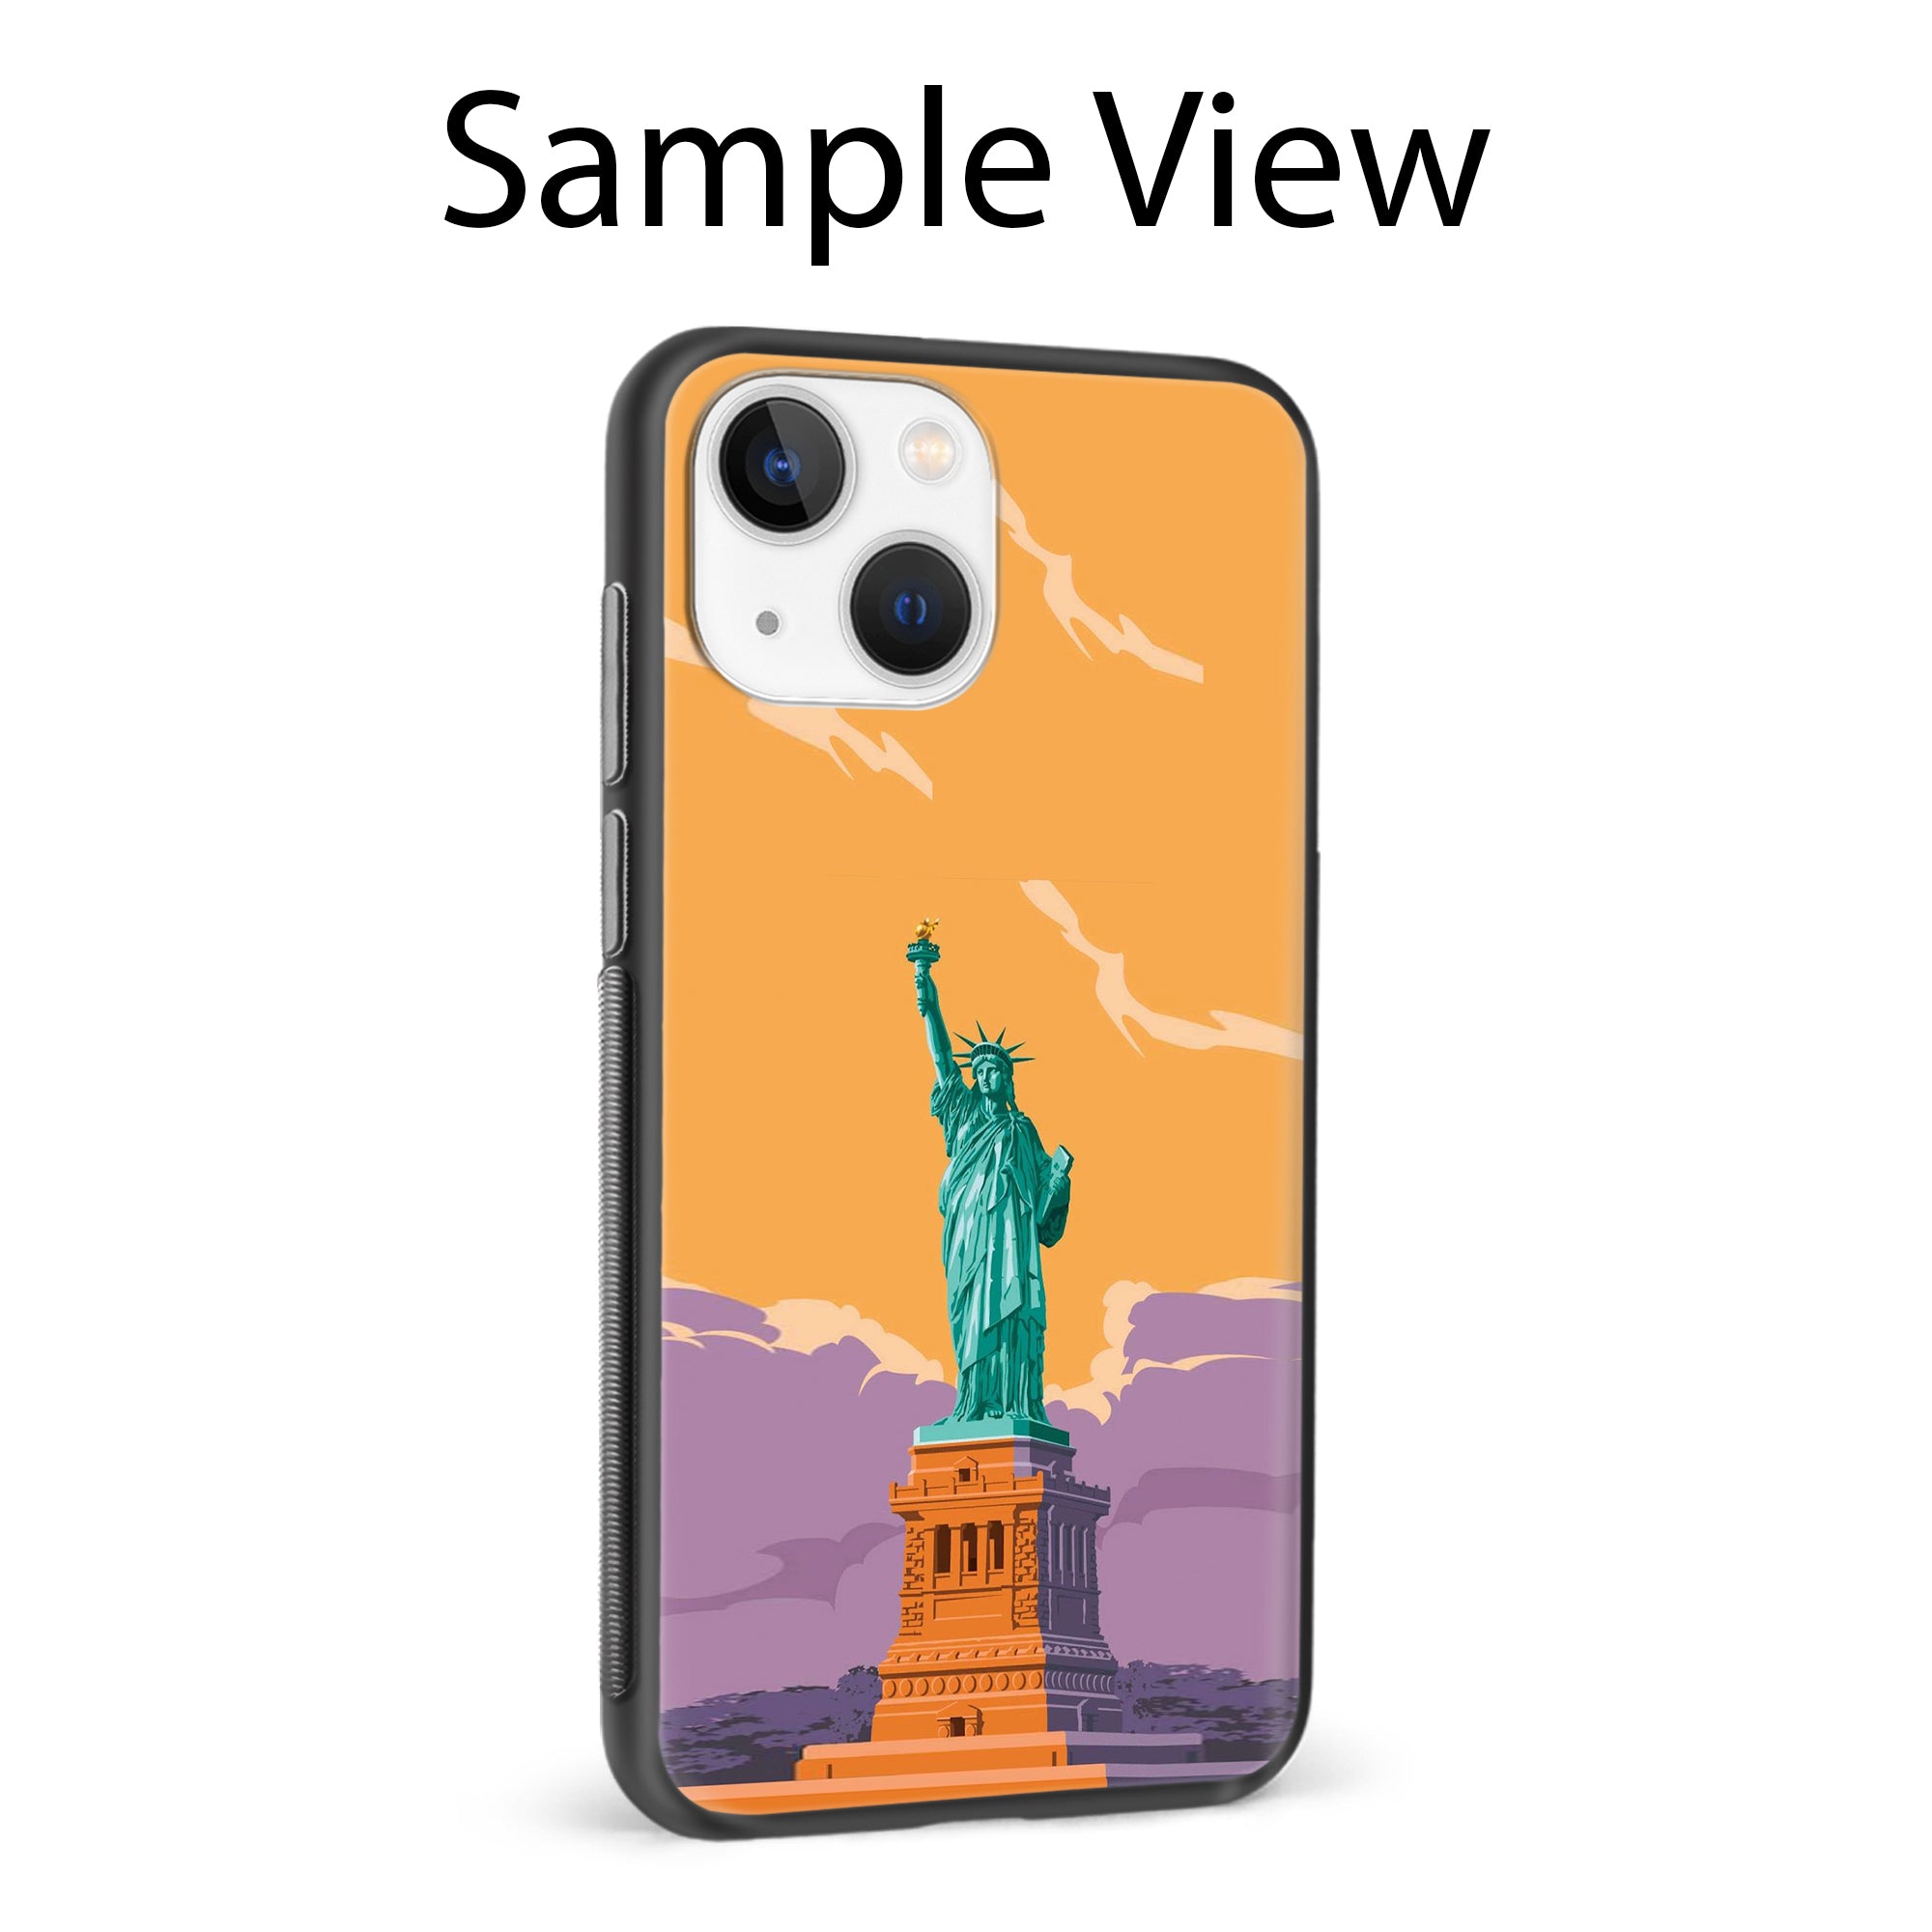 Buy Statue Of Liberty Metal-Silicon Back Mobile Phone Case/Cover For Samsung Note 10 Plus (5G) Online